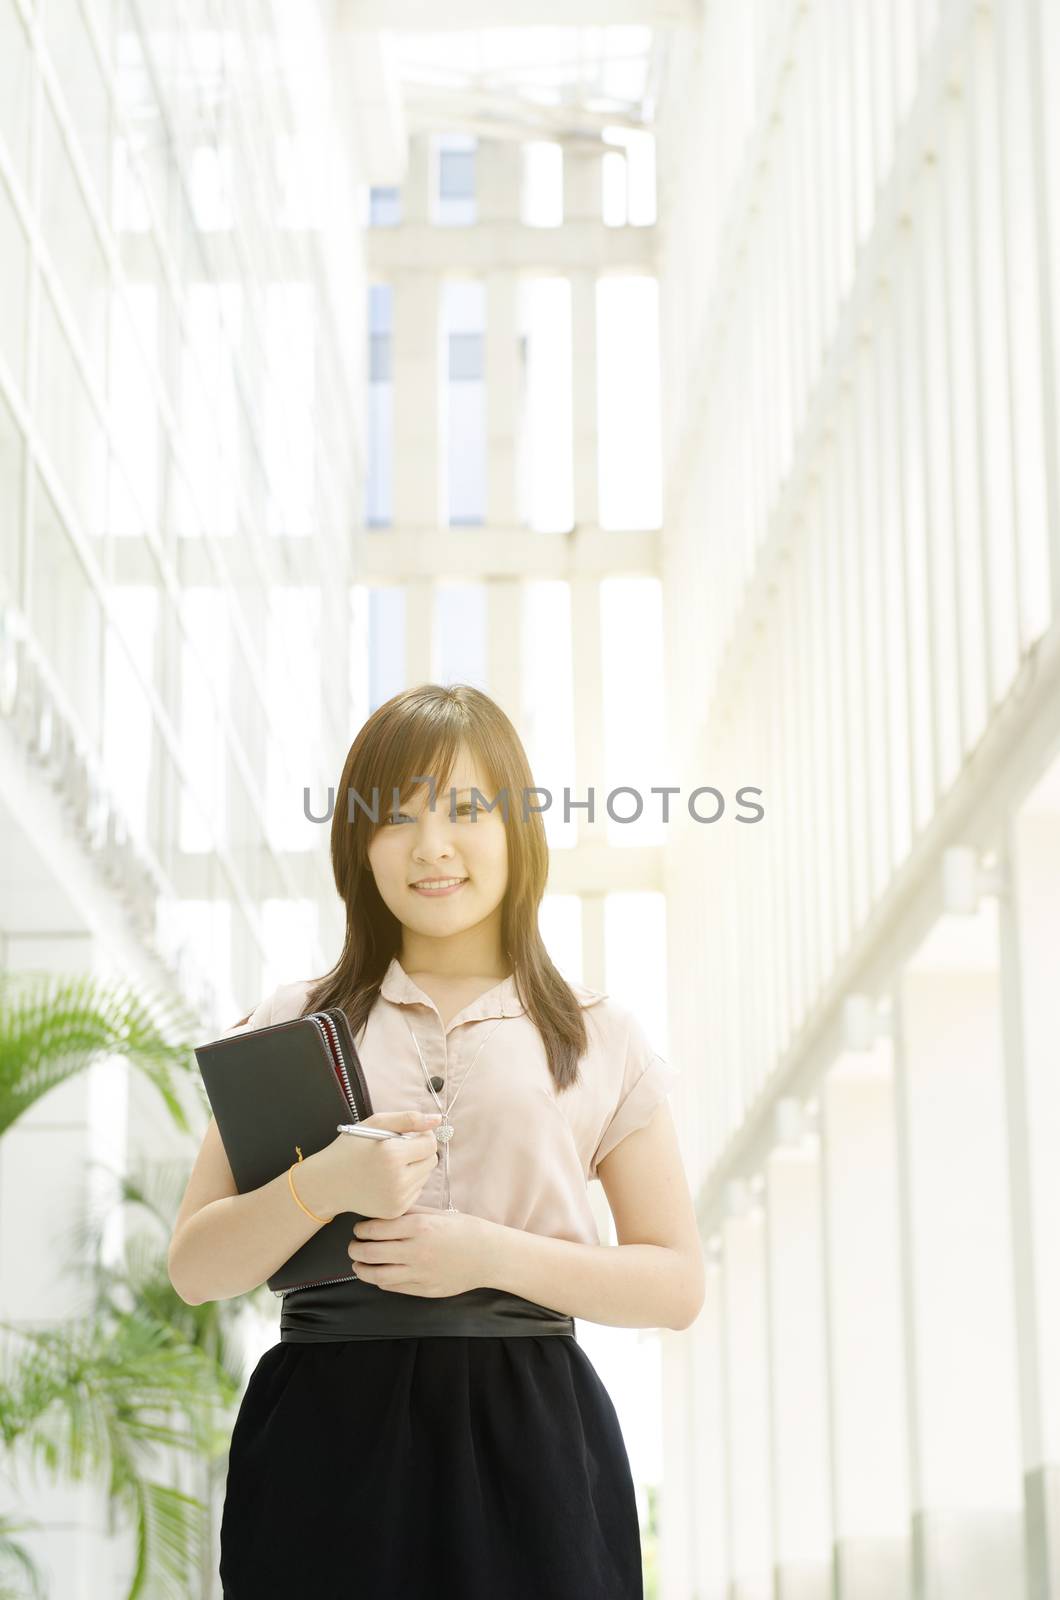 Young Asian business woman smiling and holding diary, standing in an office environment, beautiful golden sunlight at background.